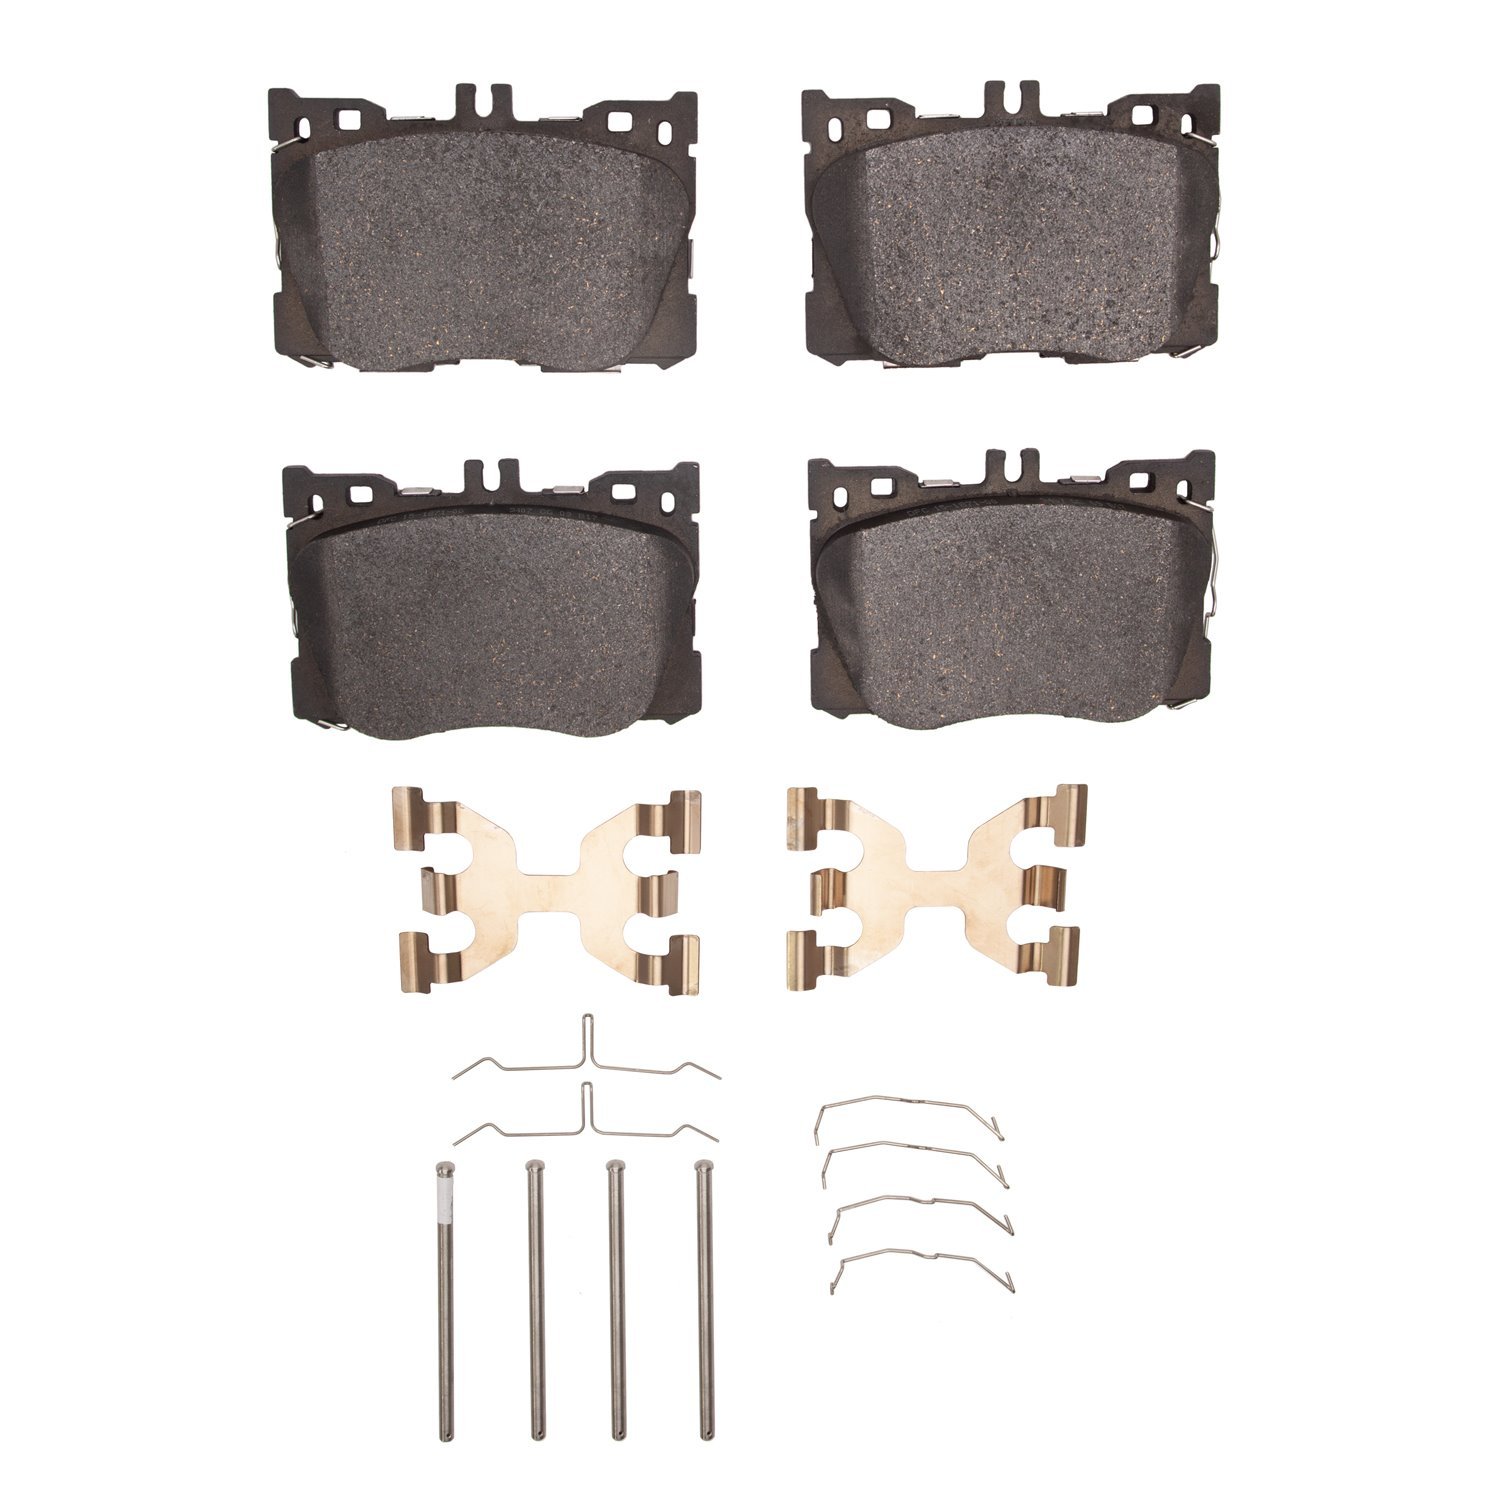 1552-1871-01 5000 Advanced Low-Metallic Brake Pads & Hardware Kit, Fits Select Mercedes-Benz, Position: Front